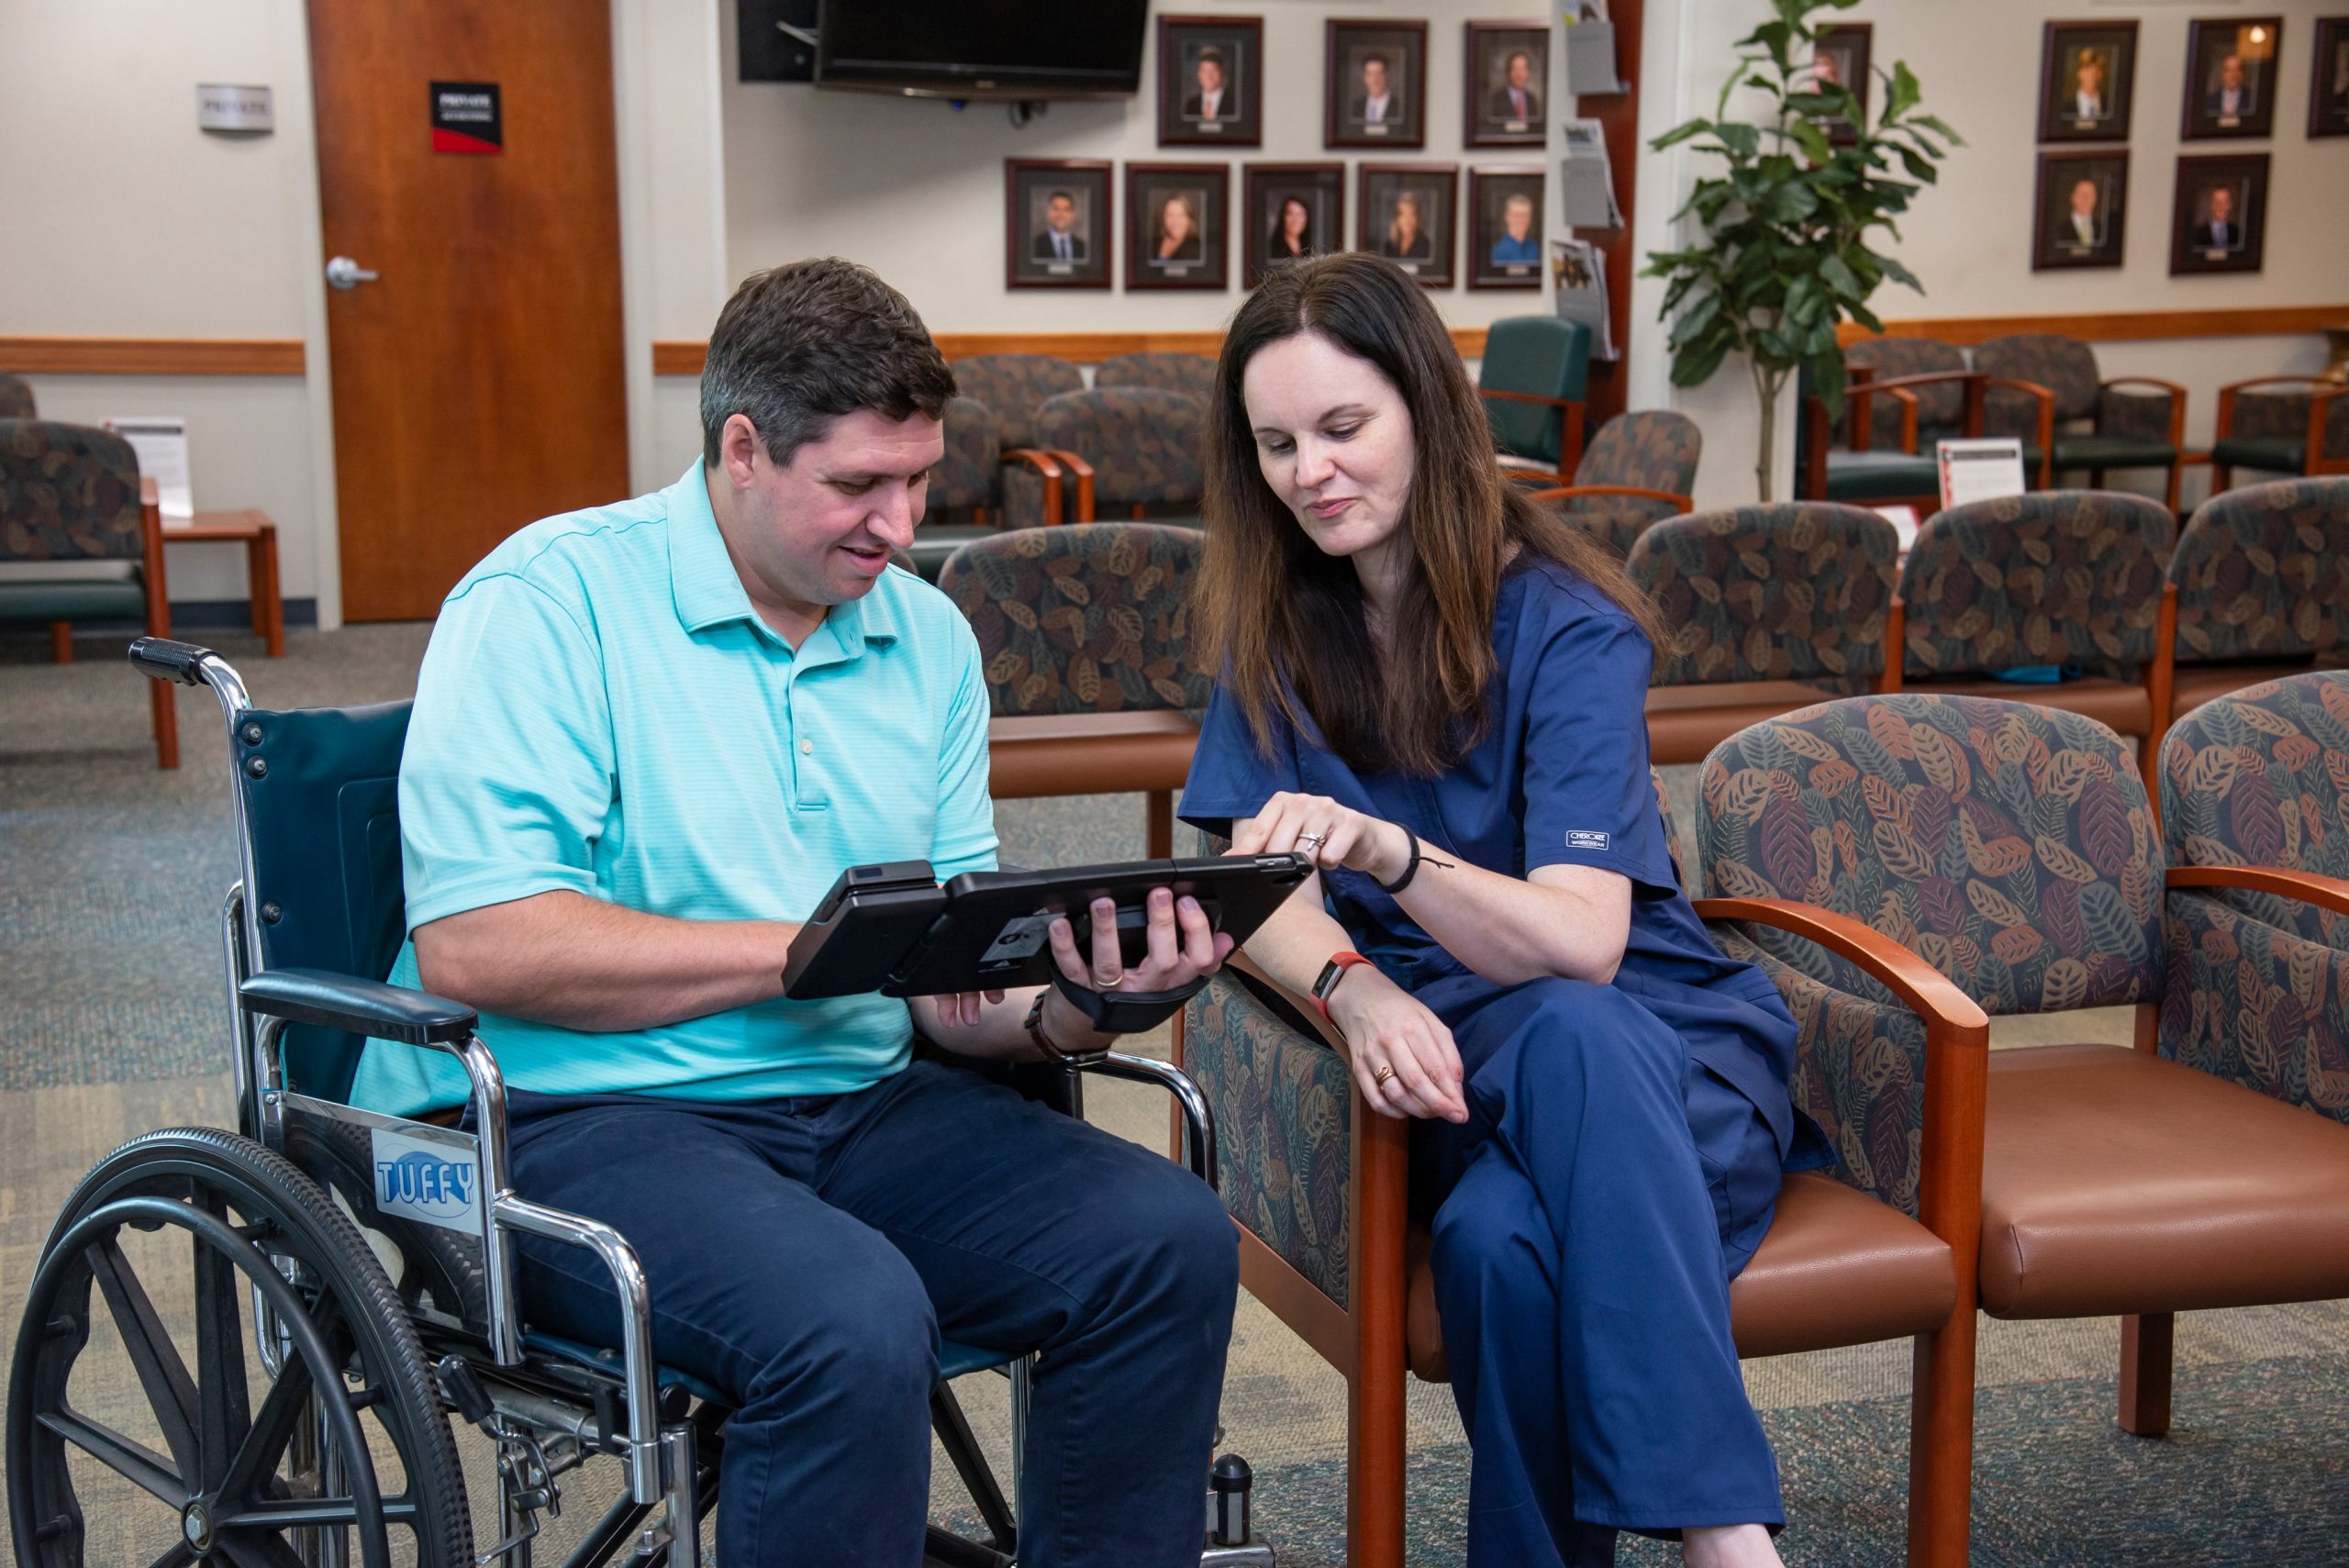 A front-office staff helps a patient in a wheelchair check-in using a tablet-based intake solution.